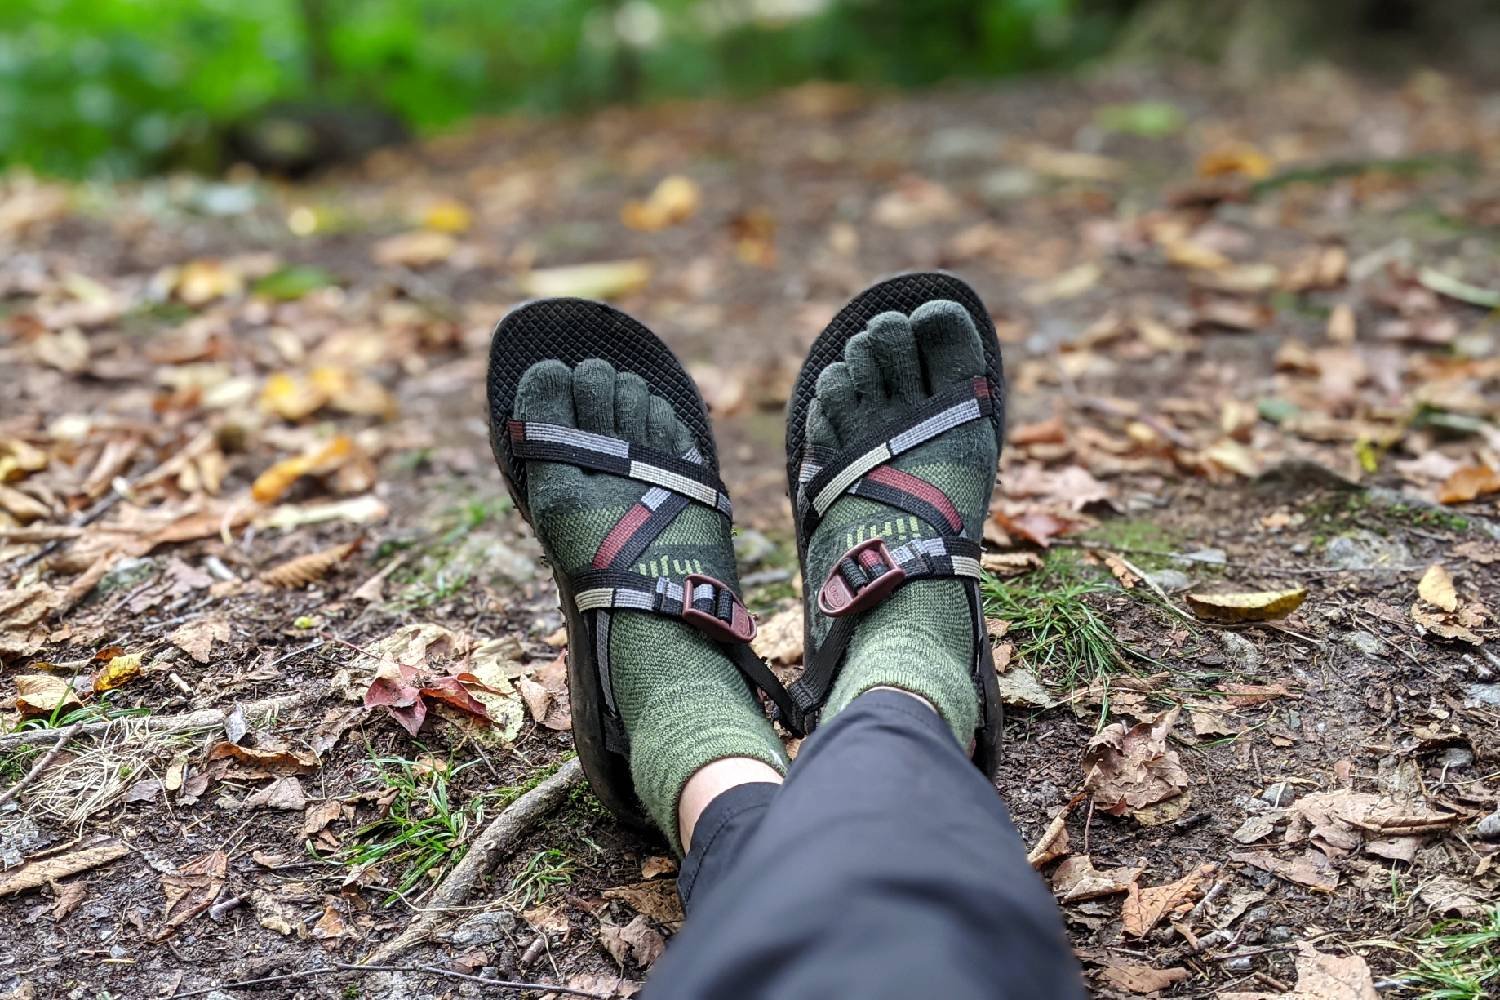 A hikers feet wearing Injinji toe socks and Chaco Z1 Classic hiking sandals with a blurred forest background